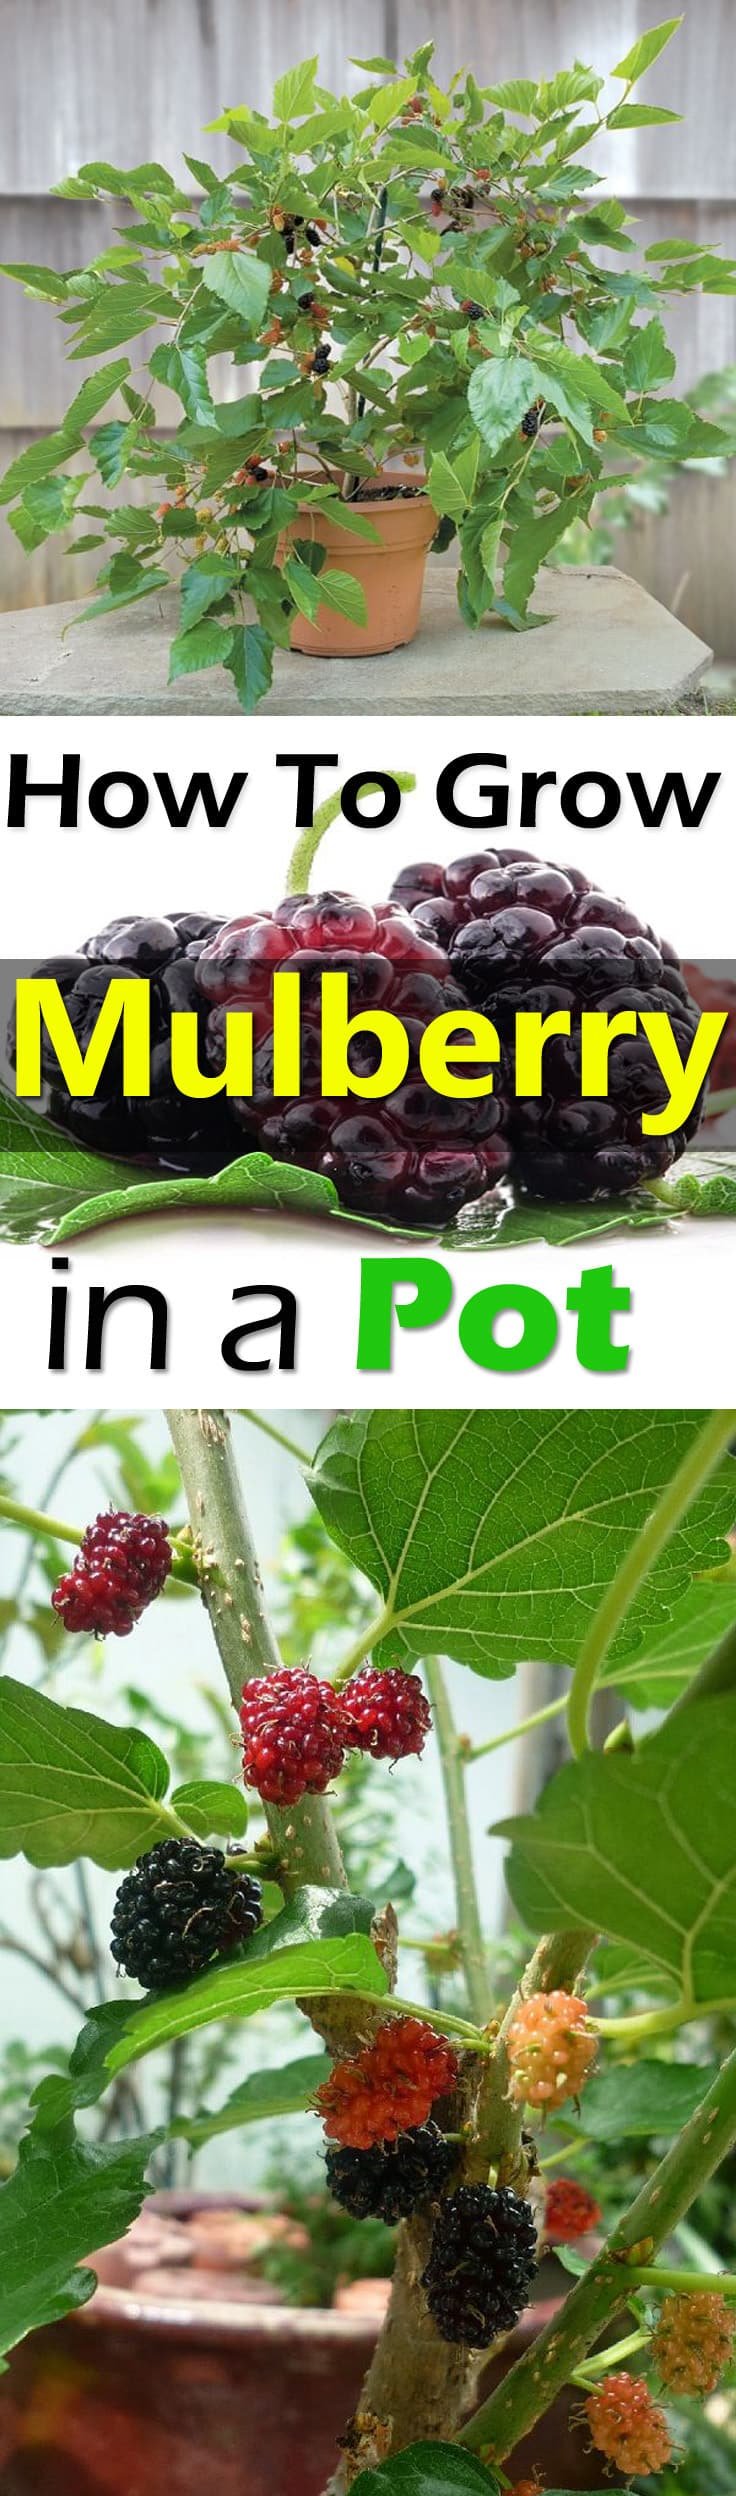 Mulberry fruits are rarely available in the market due to their short shelf life but growing them in containers can allow you to taste them FRESH. Check out!